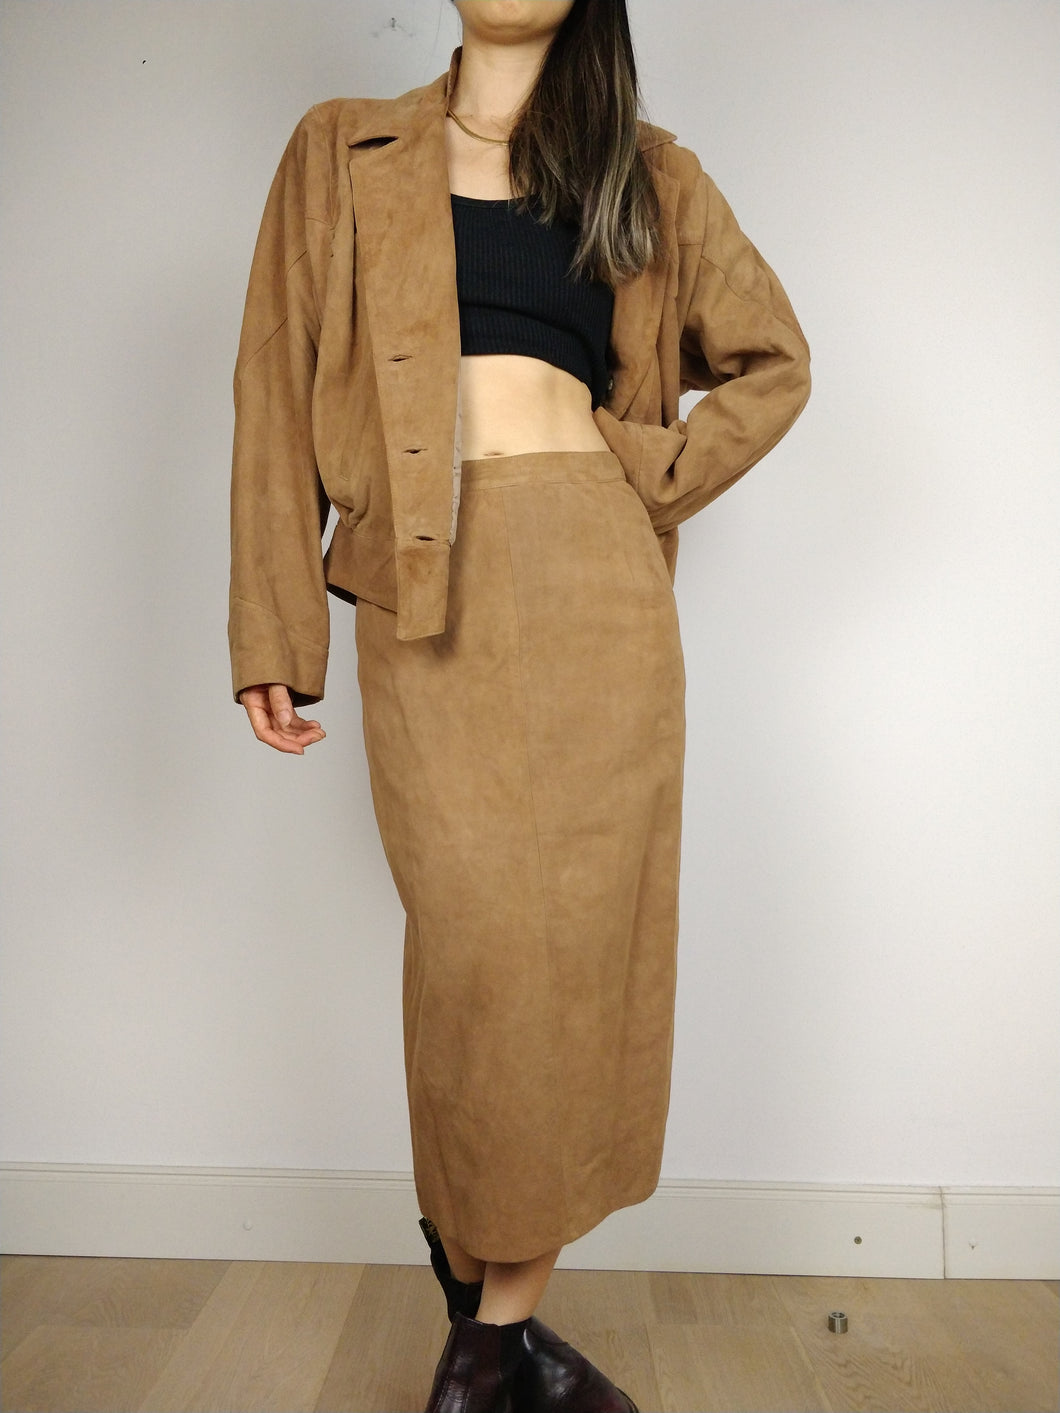 The Brown Suede Set | Vintage faux suede leather bomber jacket and high waist pencil skirt XS-S